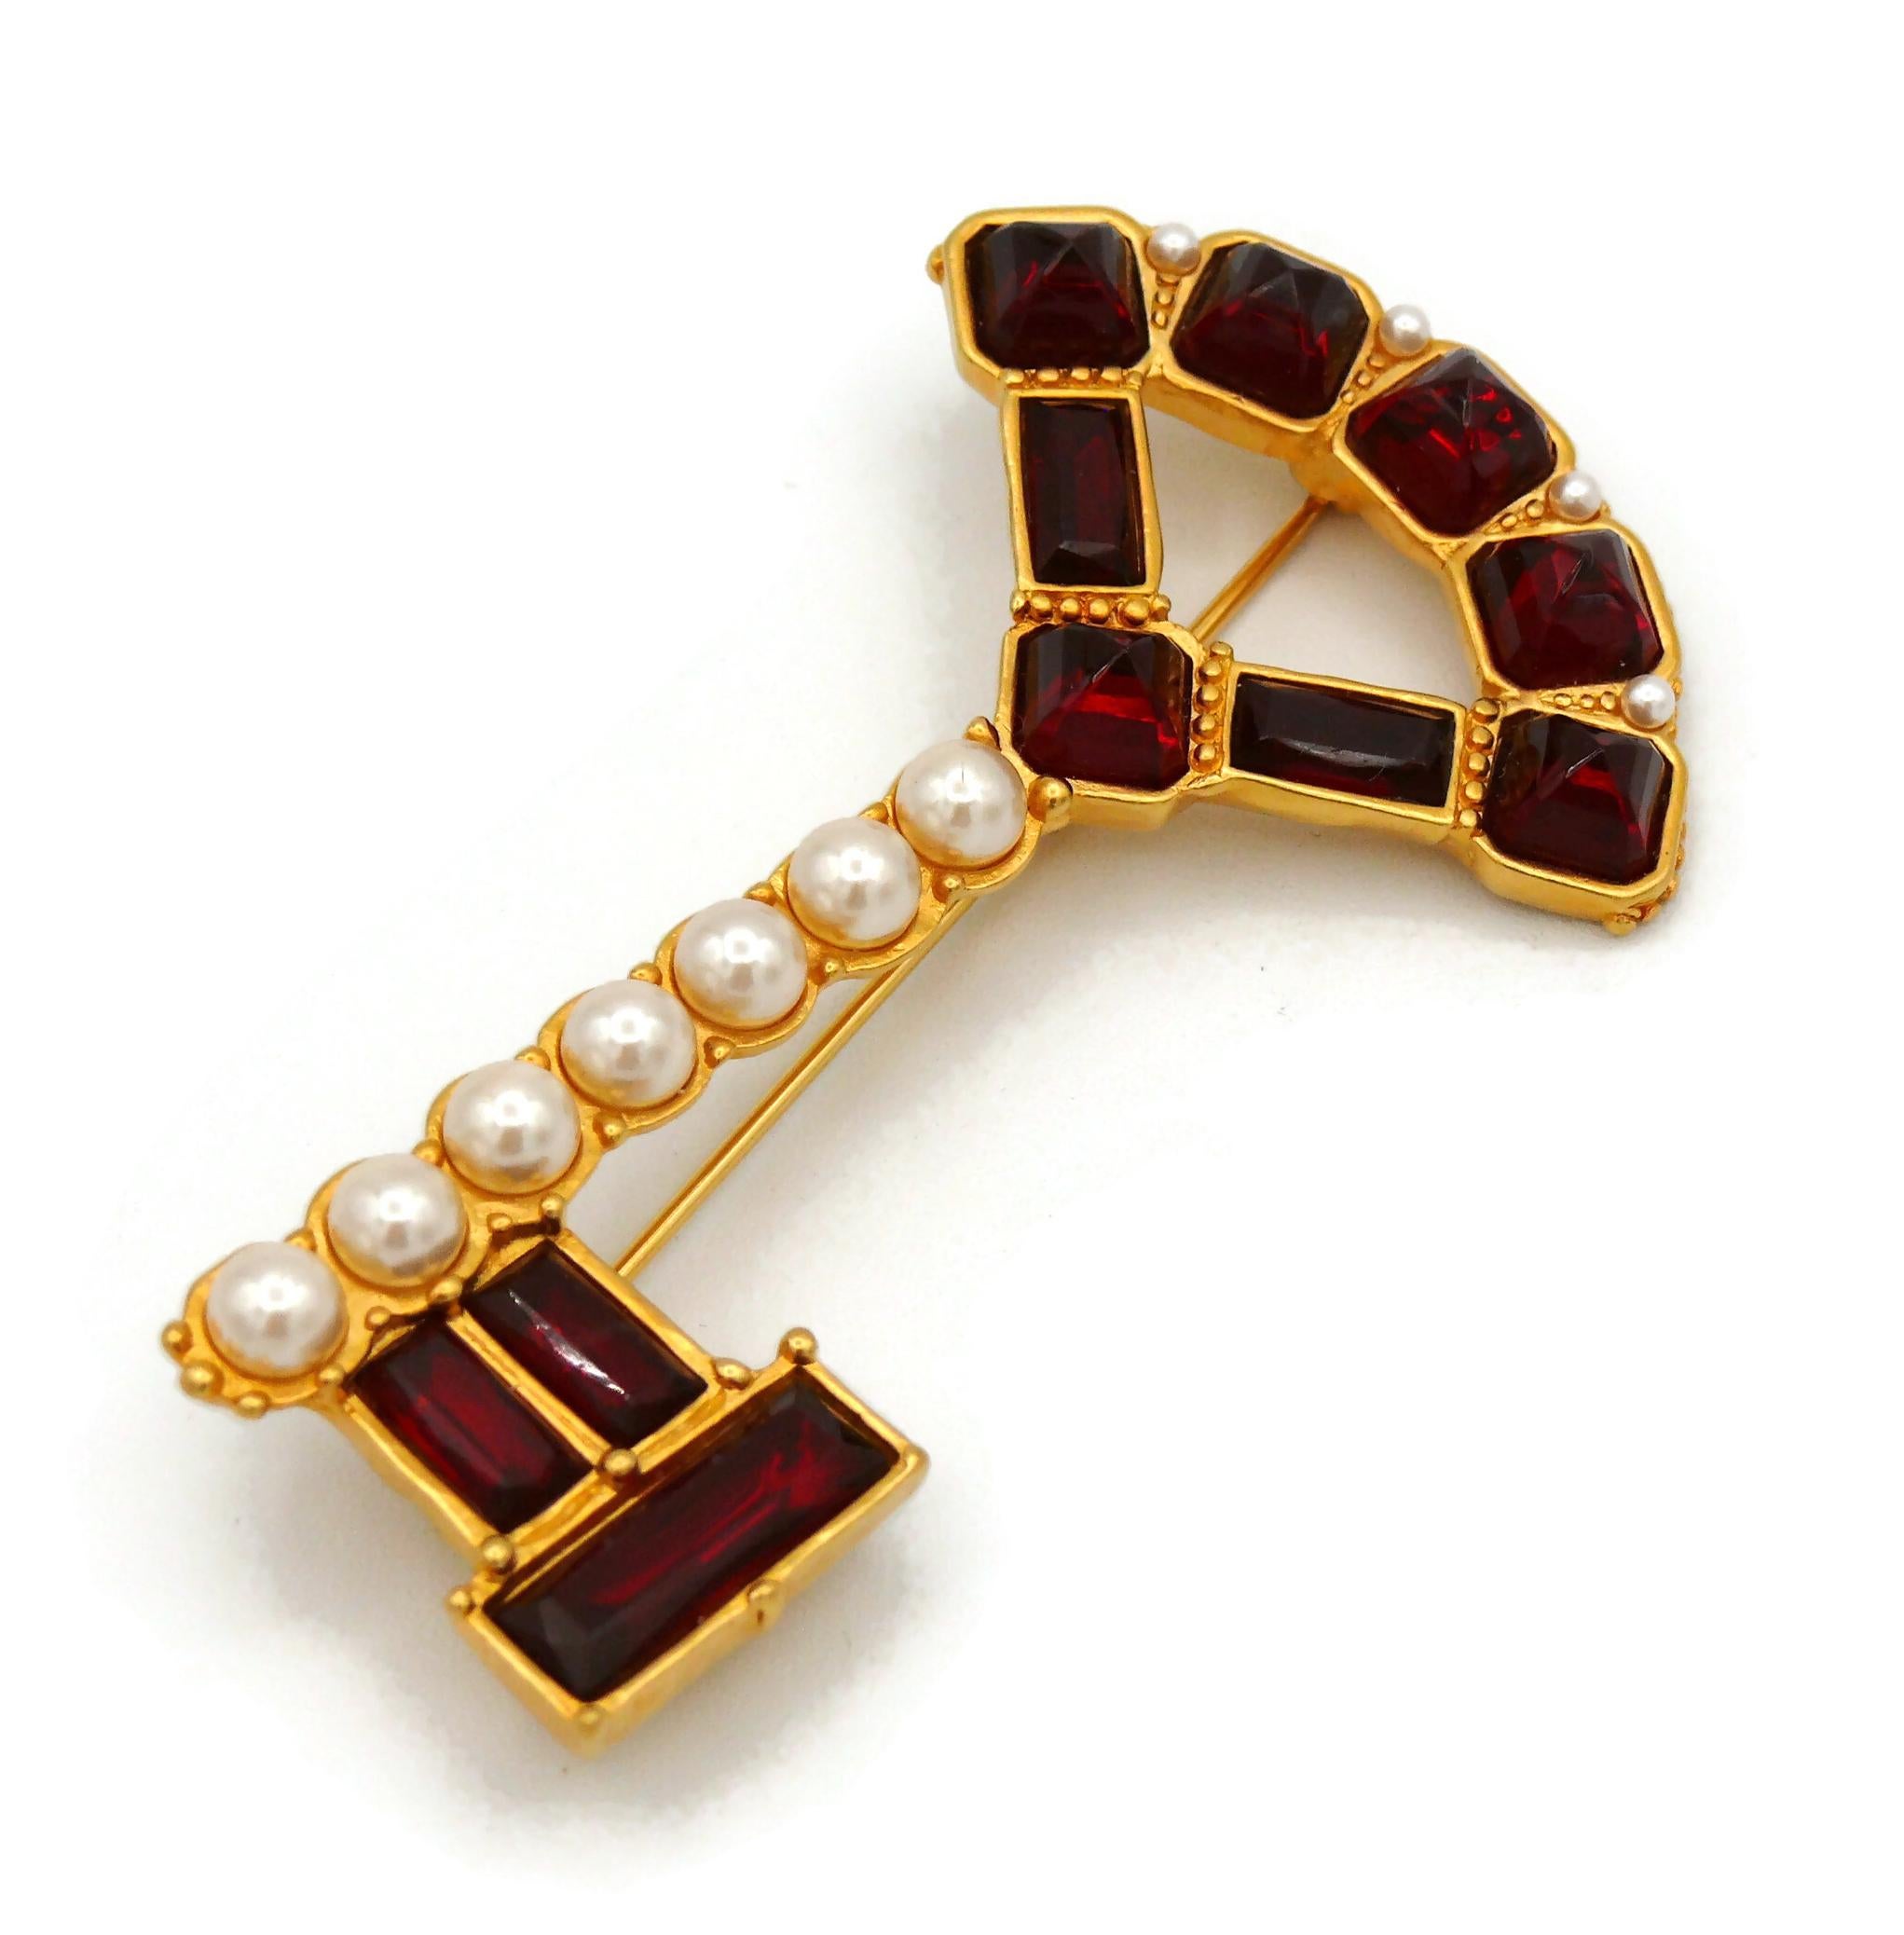 KARL LAGERFELD Vintage Jewelled Key Brooch In Excellent Condition For Sale In Nice, FR